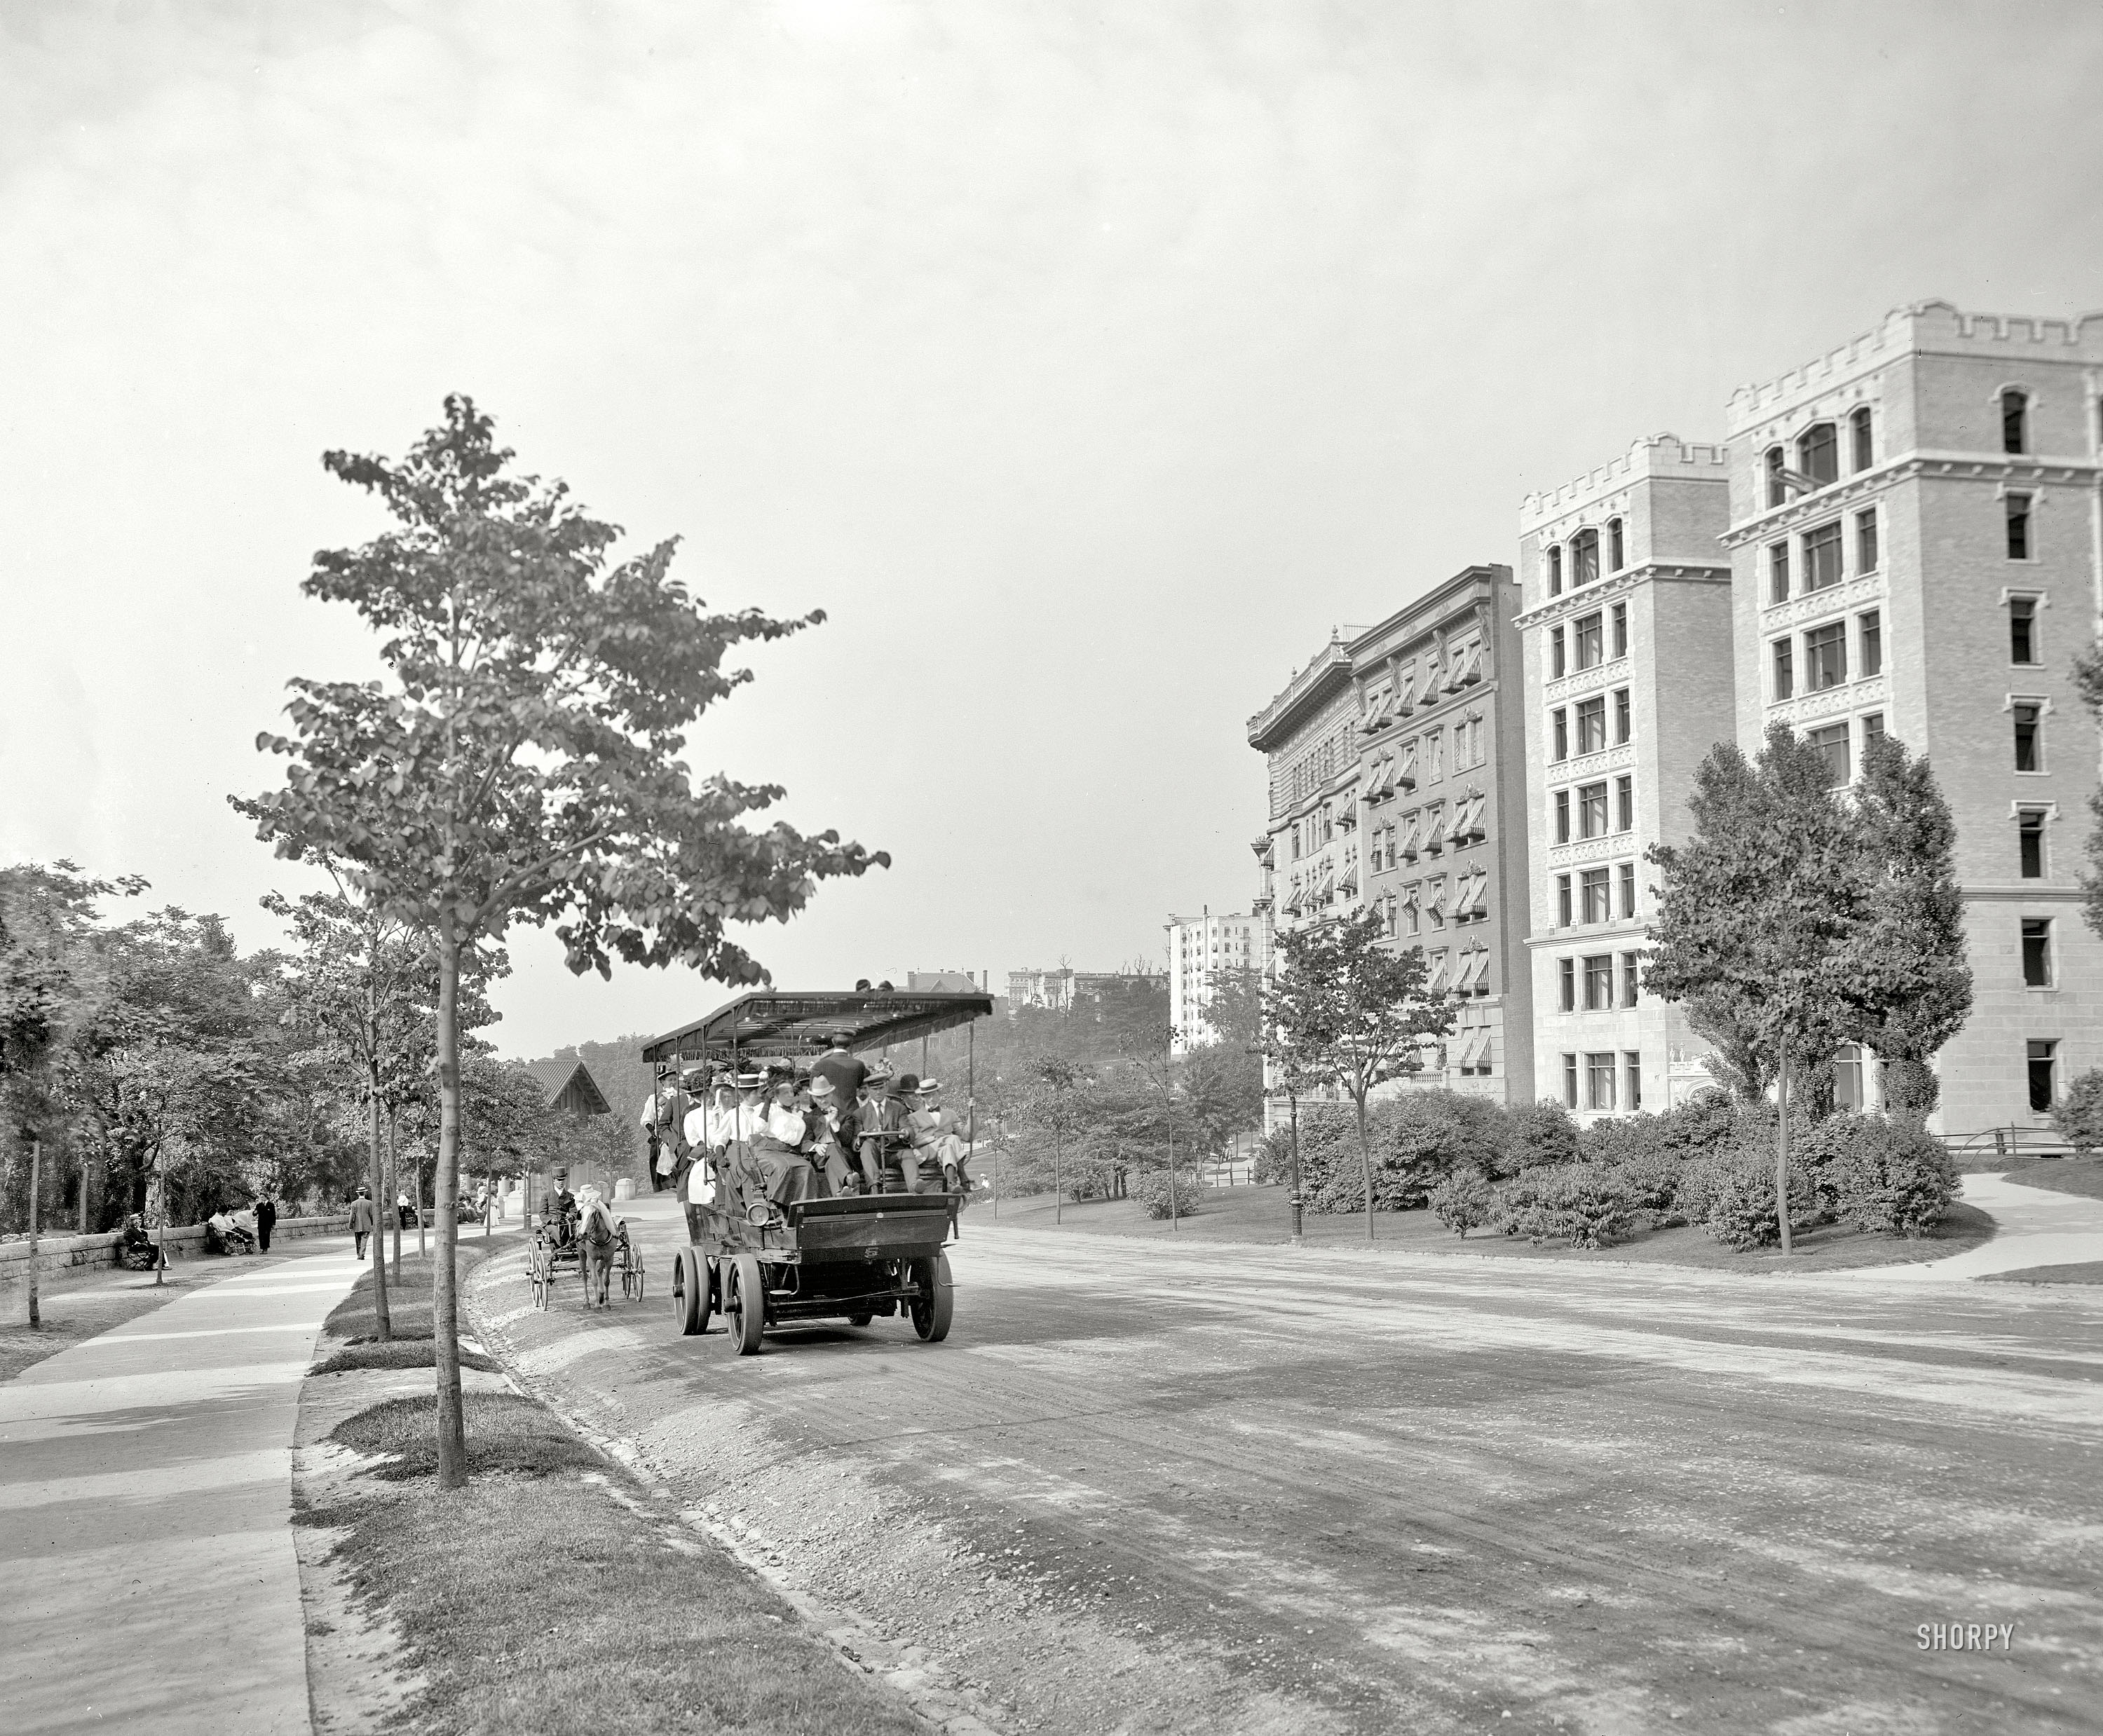 Circa 1908. "Riverside Drive, New York." Tourists in an electric charabanc or "automobile bus." 8x10 glass negative, Detroit Publishing Co. View full size.